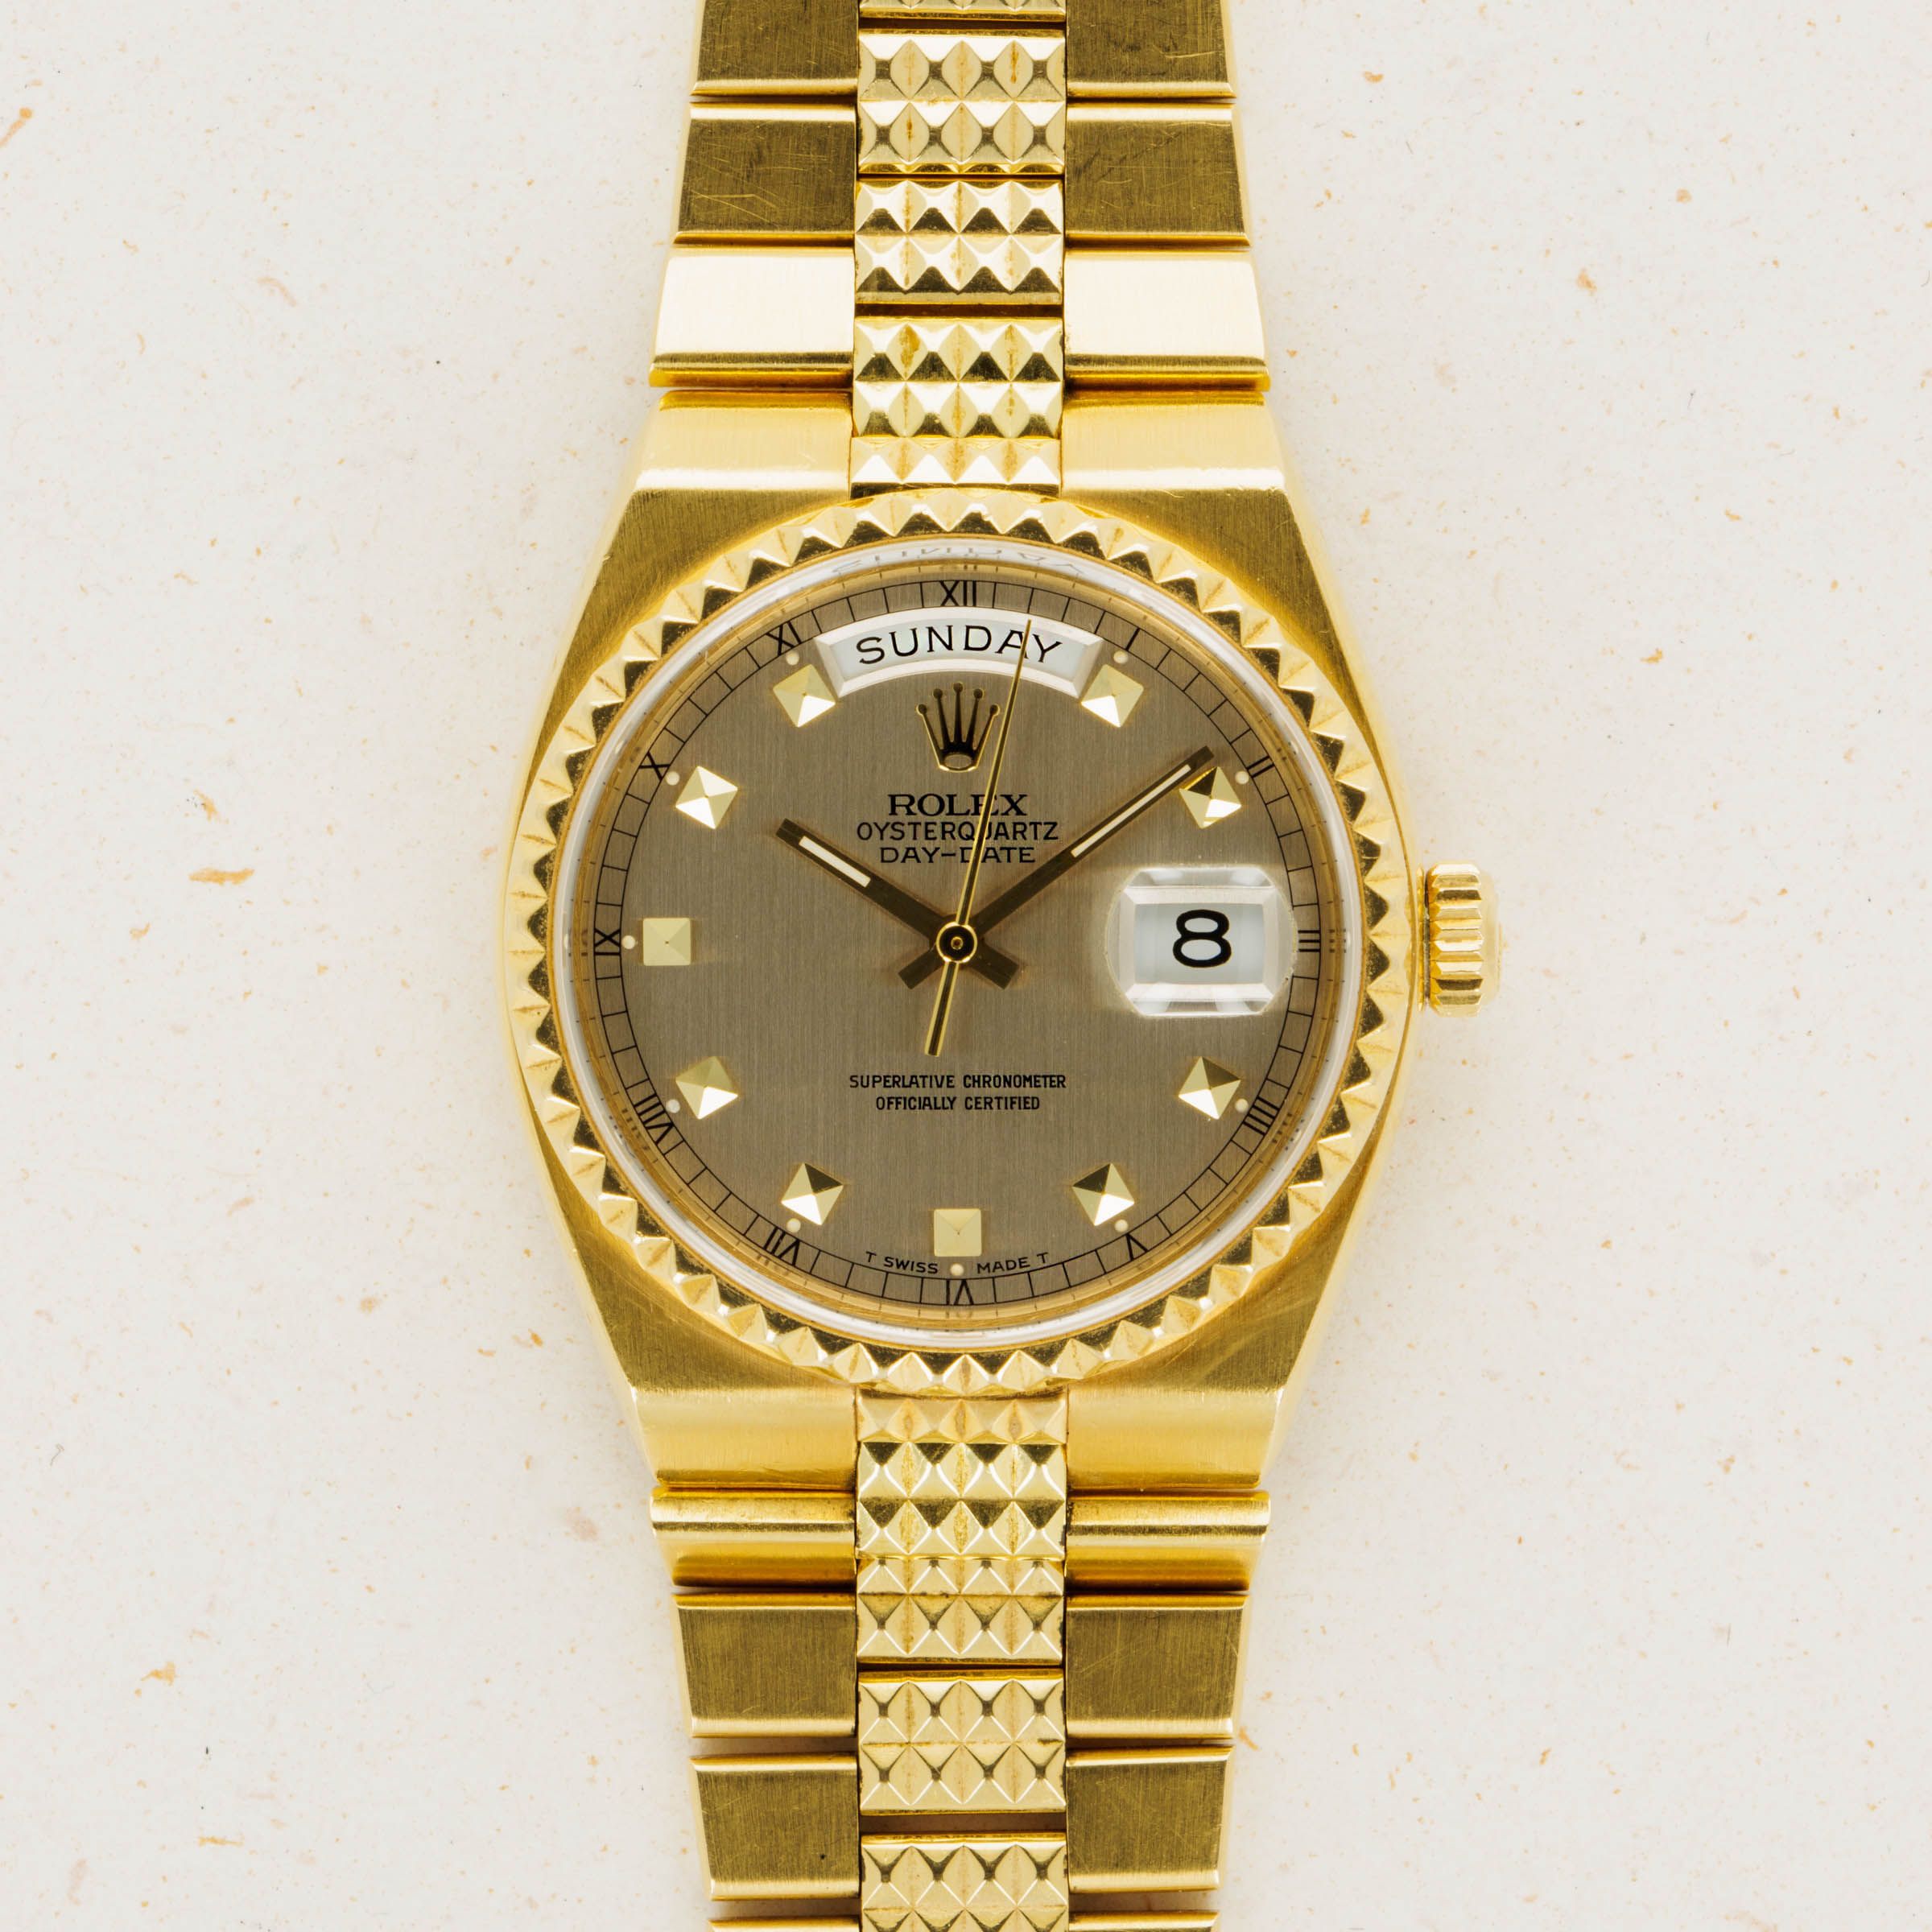 Rolex Oysterquartz Pyramid 19028 18k YG | Auctions | Loupe This